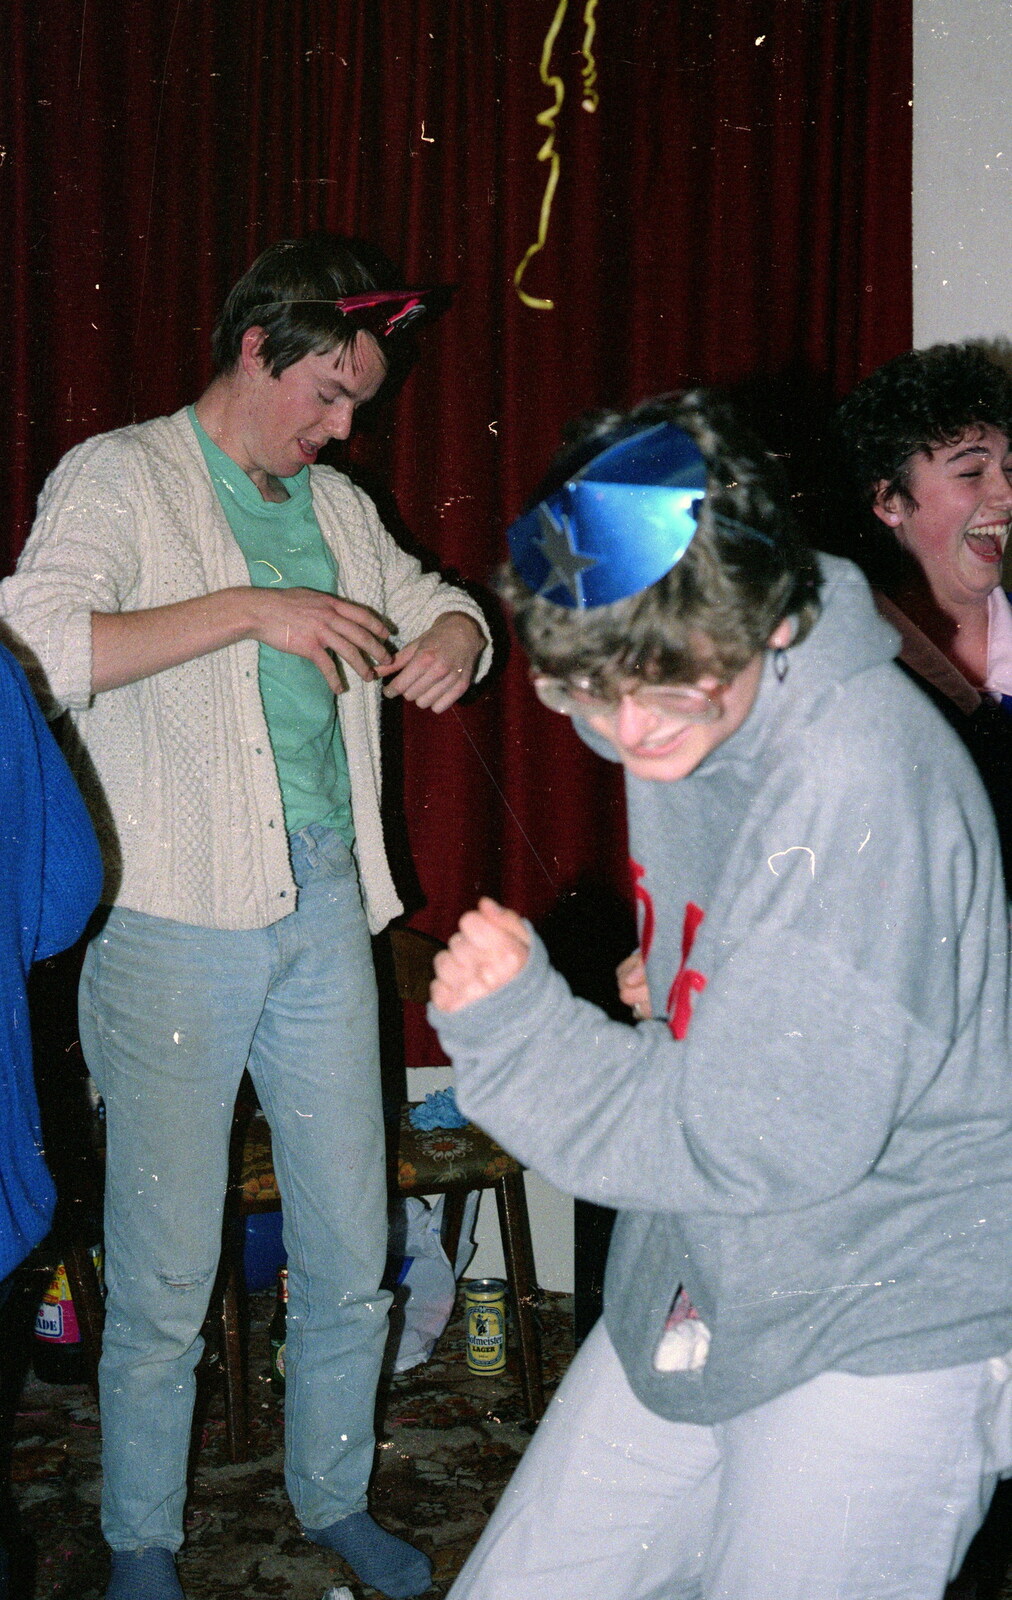 More crazy dancing from Uni: BABS Christmas Ball and a Beaumont Street Party, Plymouth - 16th December 1985